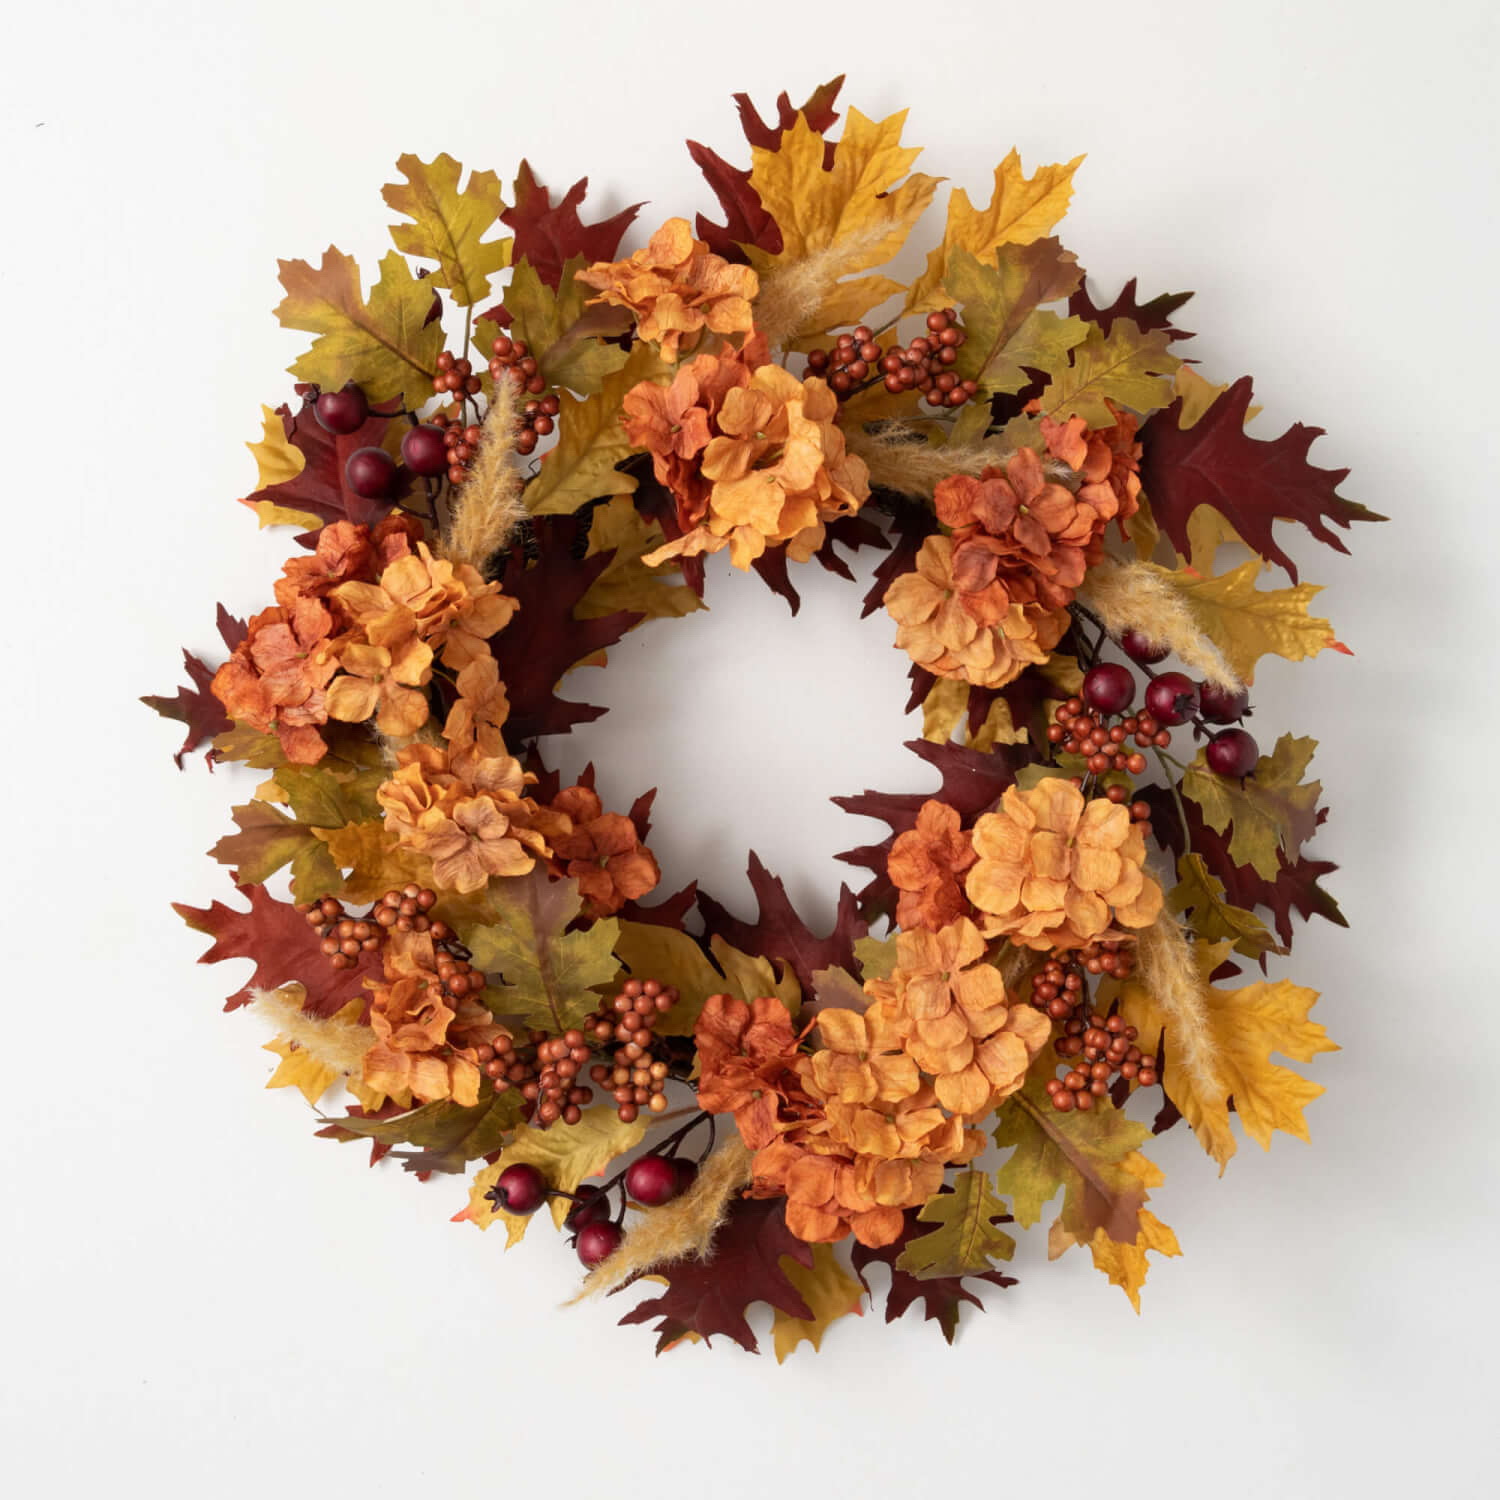 Sullivans HYLWR Hydrangea and Leaf Wreath, 24 in L, Polyester, Multi-Color - 1